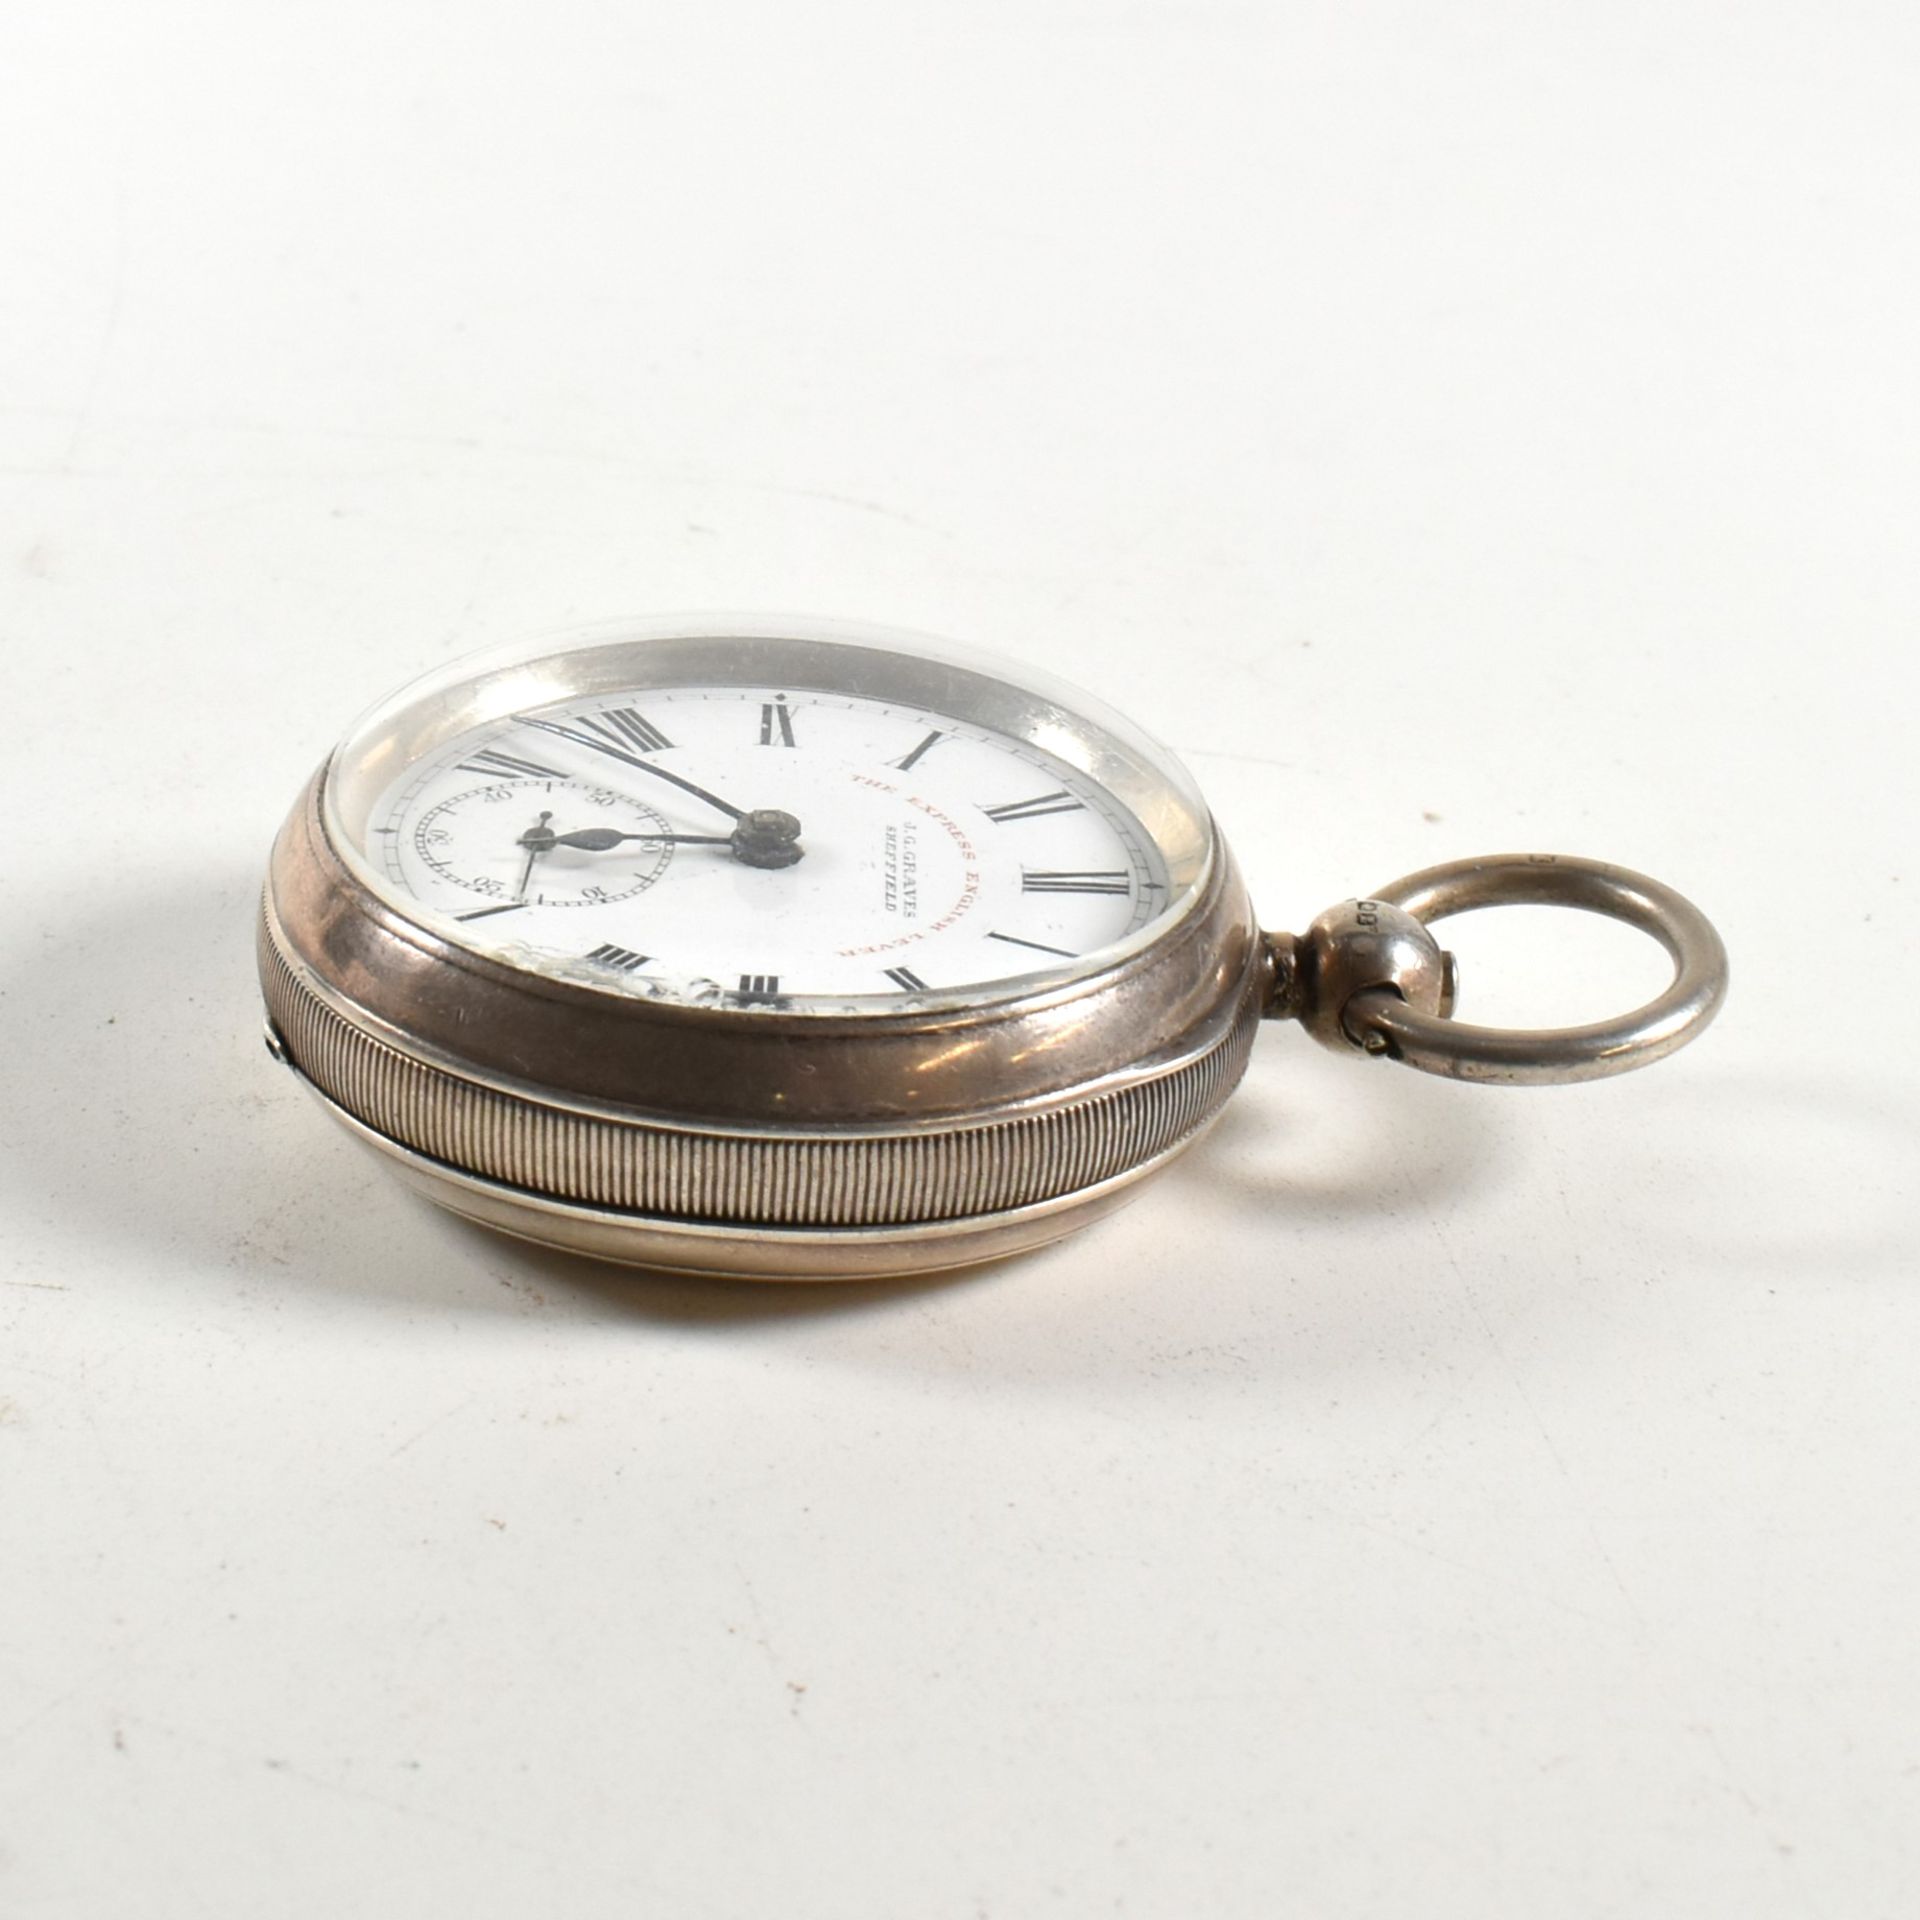 SILVER HALLMARKED JG GRAVES OPEN FACED POCKET WATCH - Image 5 of 8